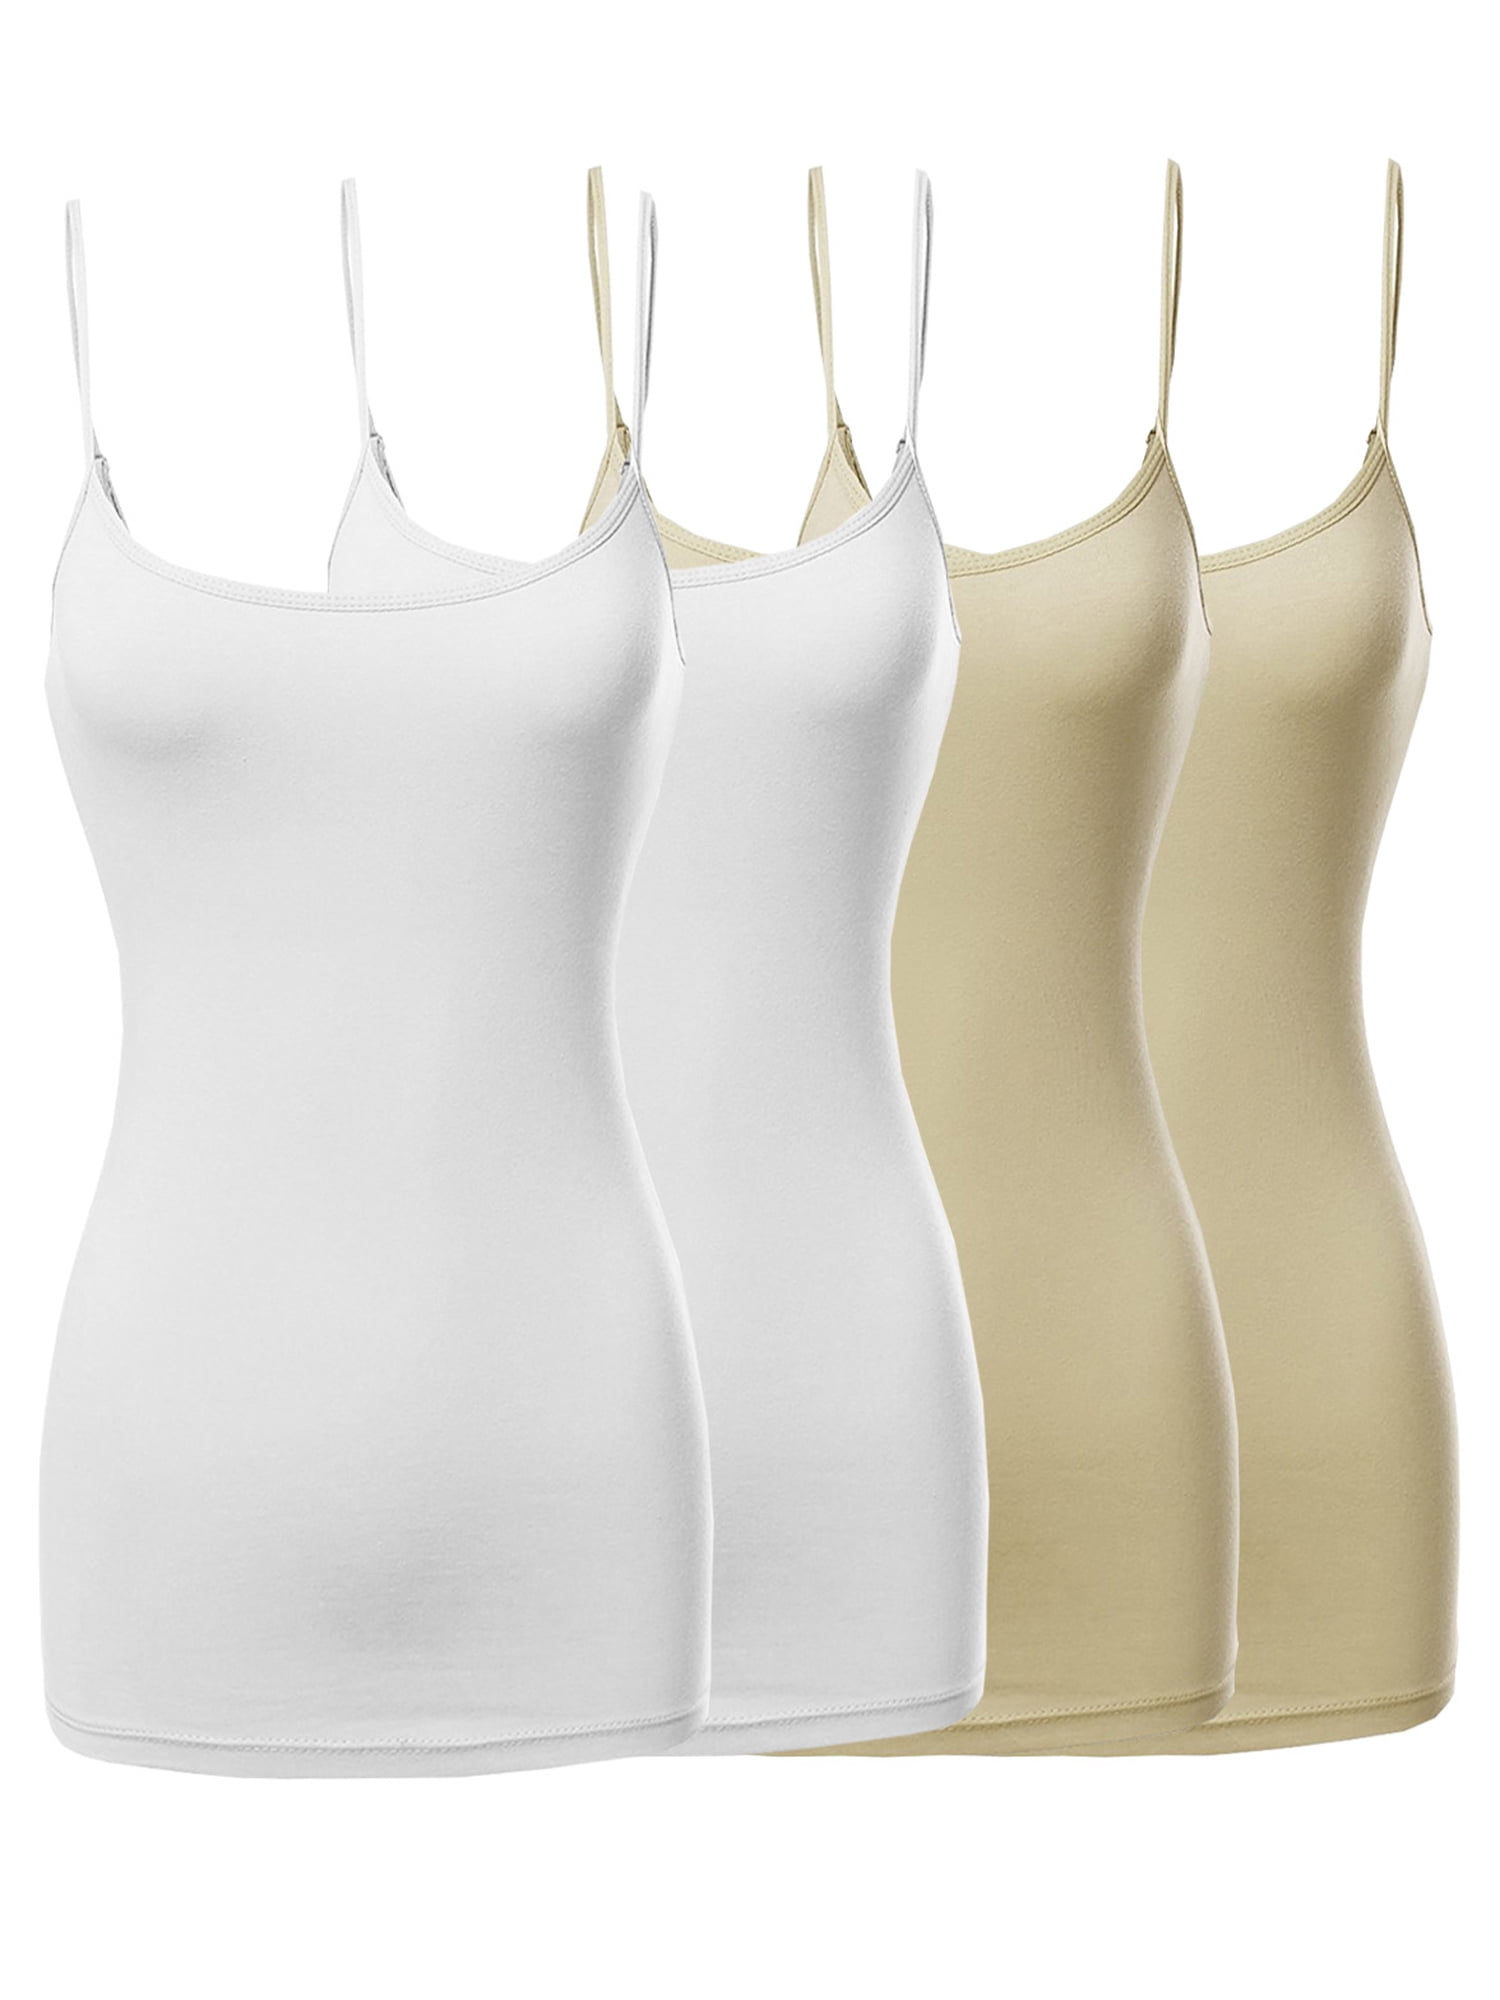  SATINIOR 3-Pack Women's Lace Camisoles - Adjustable Spaghetti  Strap Long Tank Tops : Everything Else